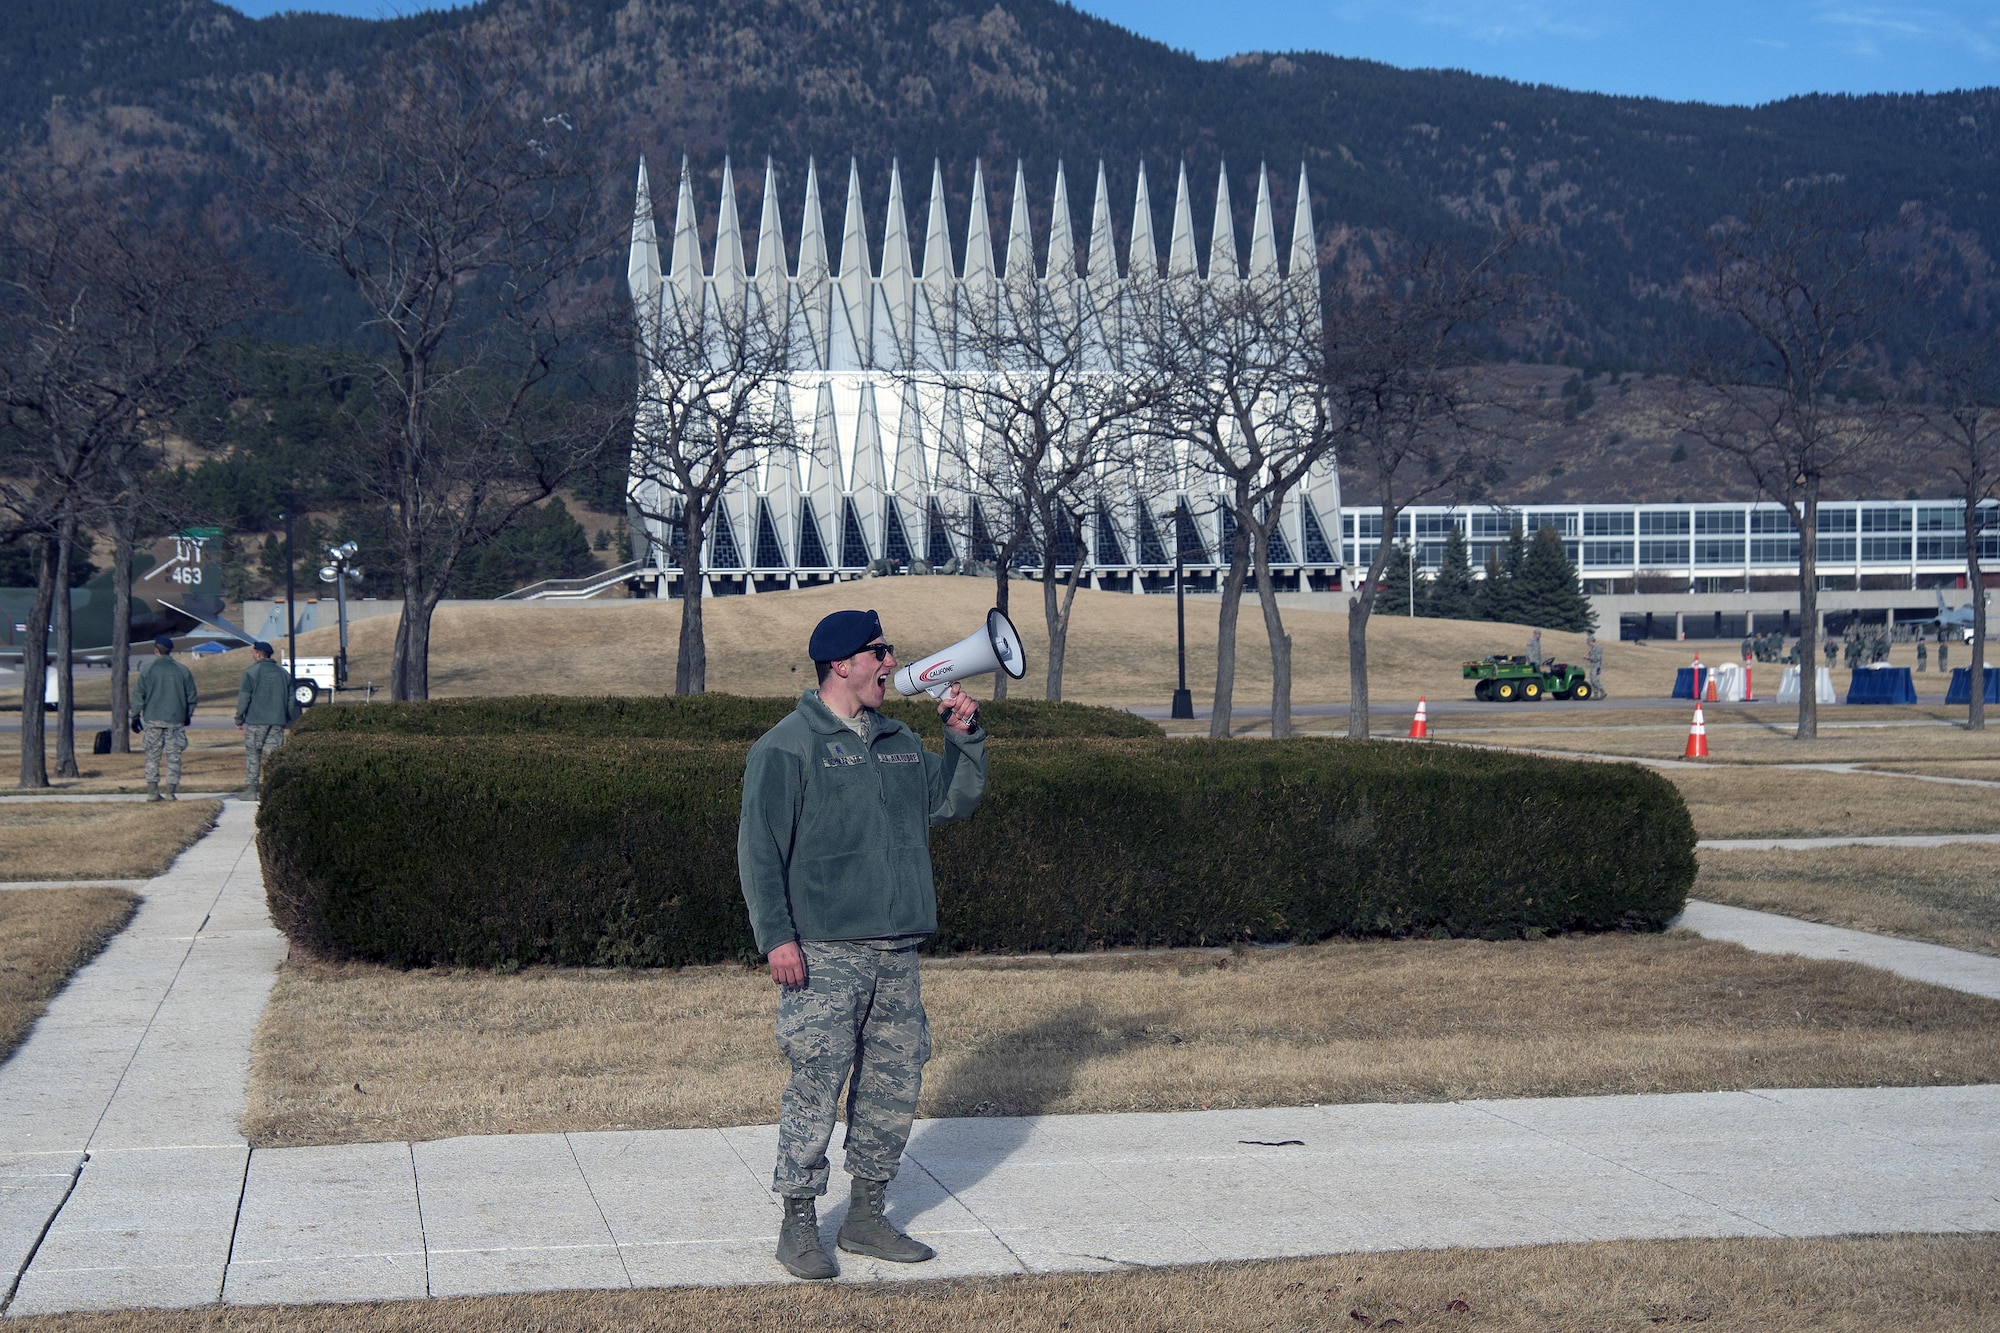 A senior cadet at the U.S. Air Force Academy, Colorado, uses a megaphone to get the attention of freshmen cadets March 10, 2017 during Recognition. Recognition is a rigorous annual event freshmen or "four degrees" must overcome before earning the status of "recognized cadet" at the Academy.  (U.S. Air Force photo/Bill Evans)